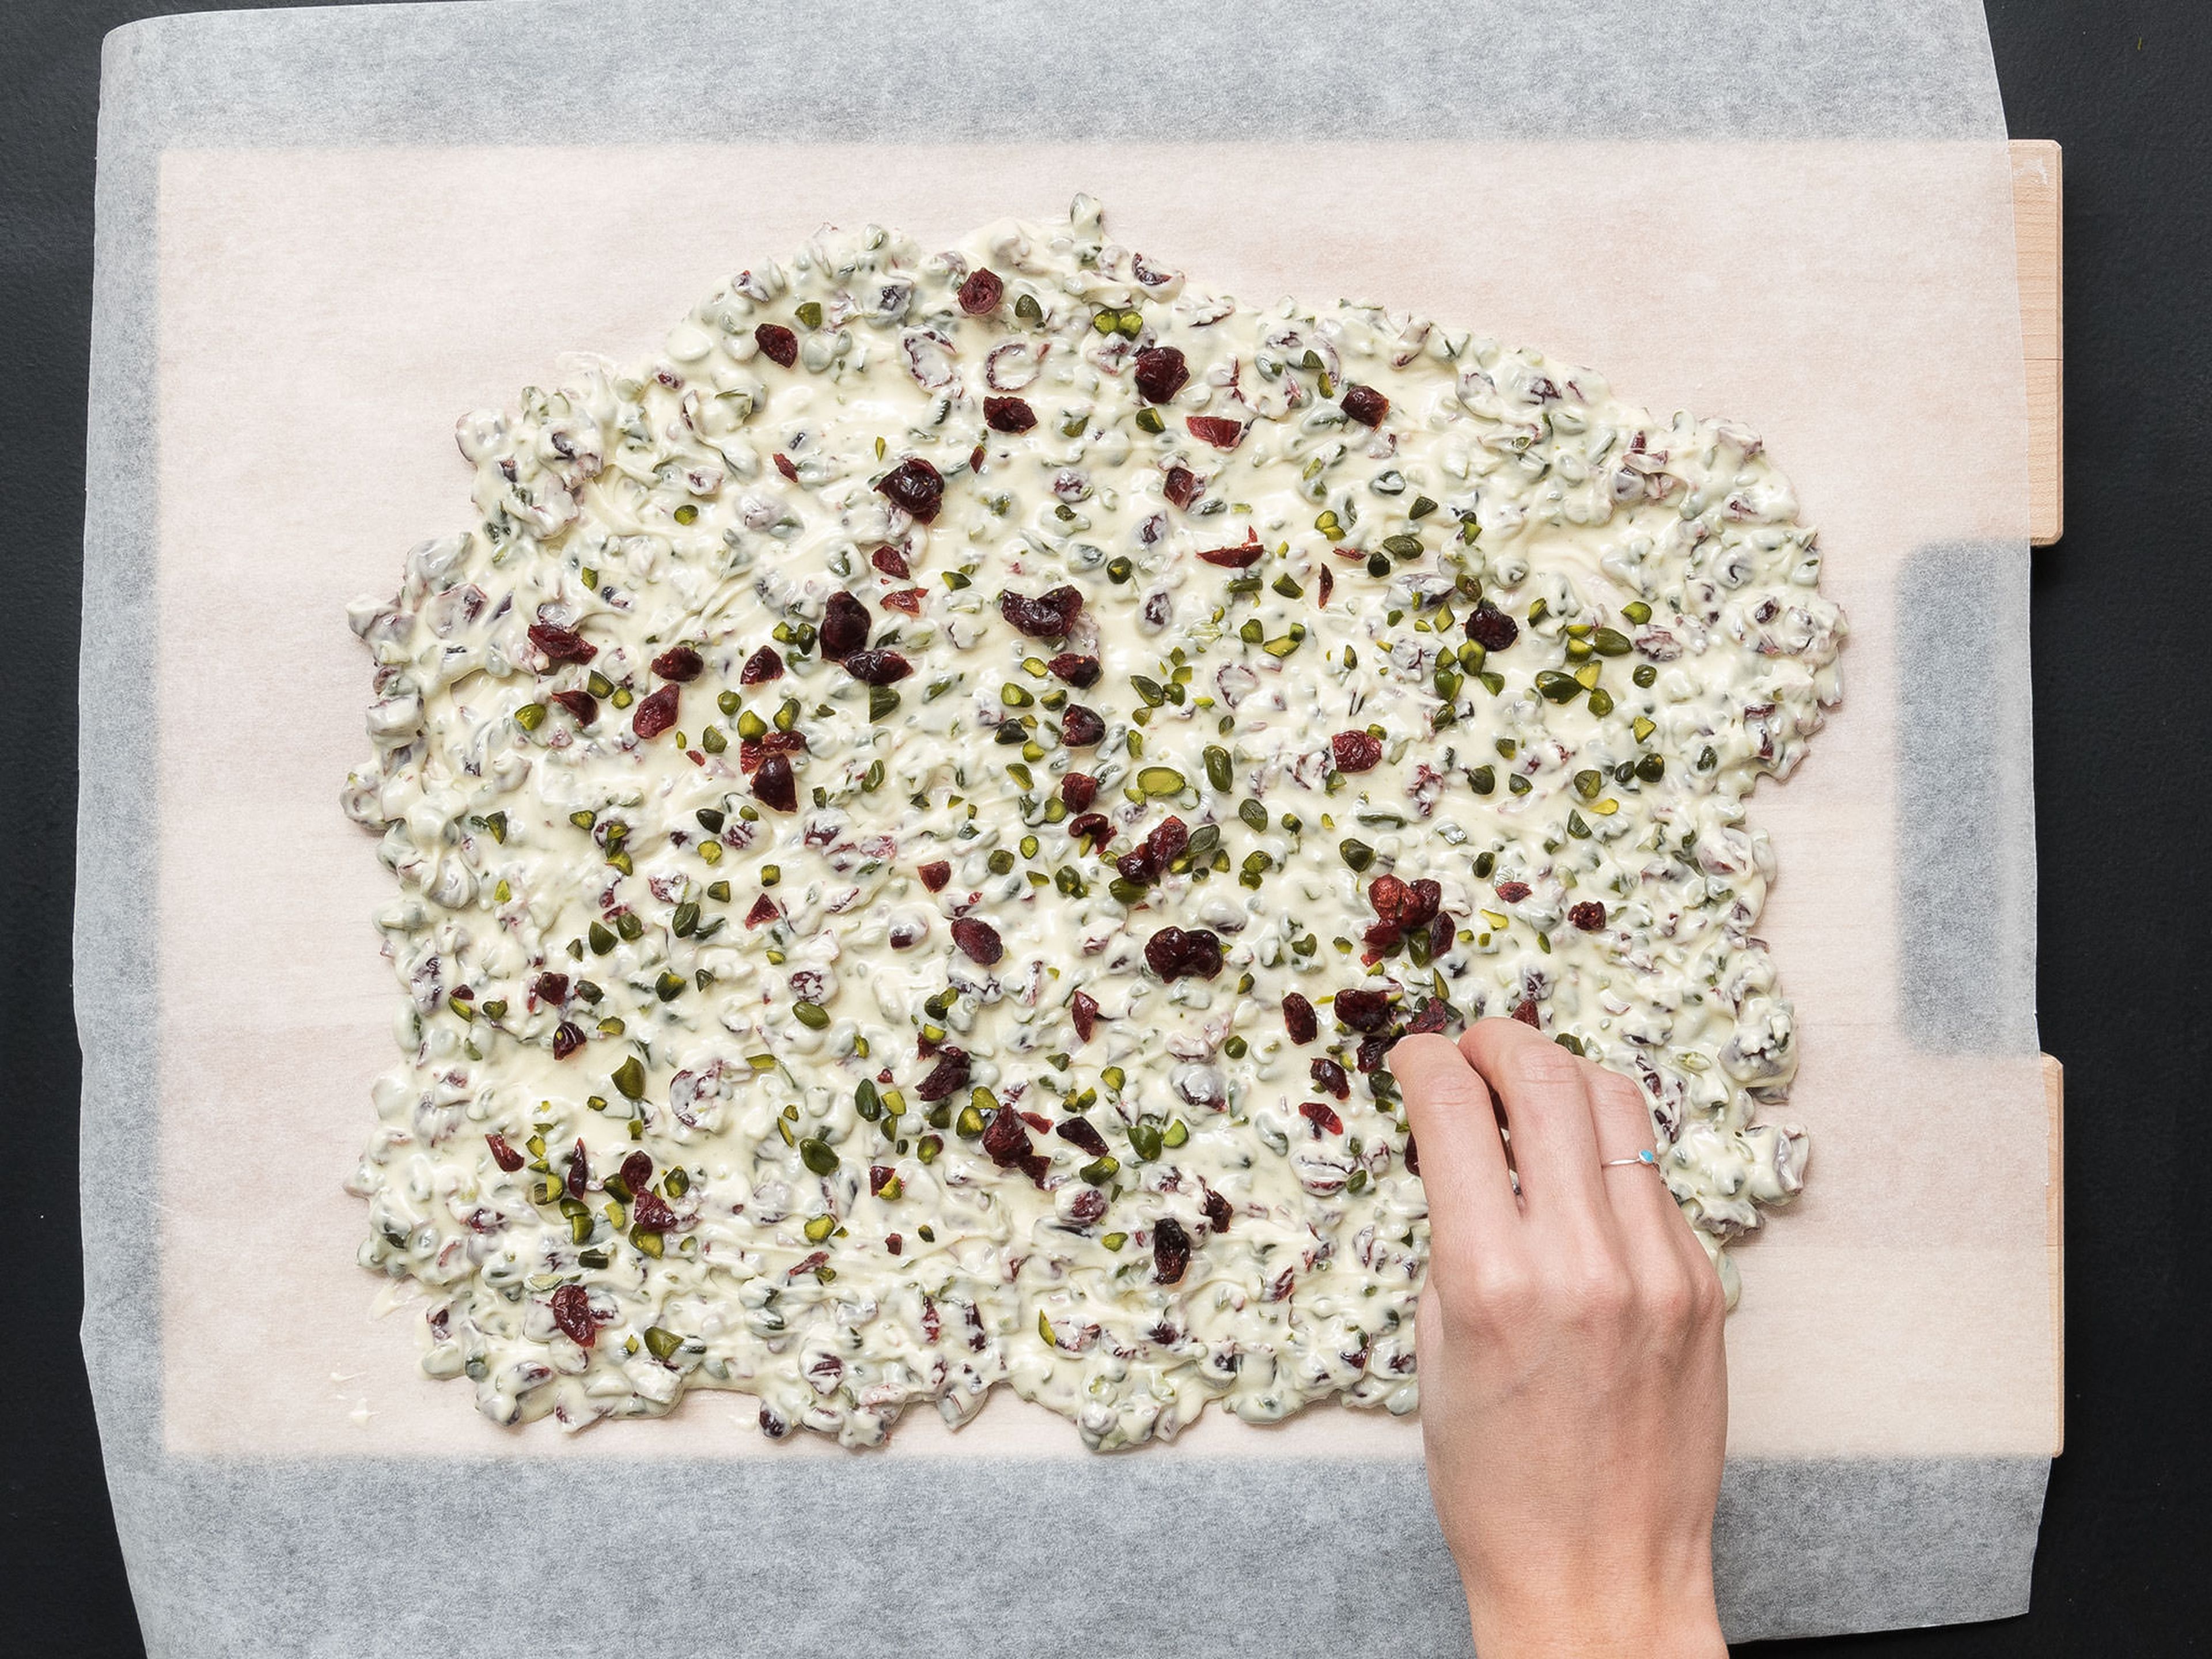 Spread the chocolate mixture over parchment paper, approx. 0.5-cm/0.25-in. thick, and sprinkle remaining pistachios and cranberries on top.